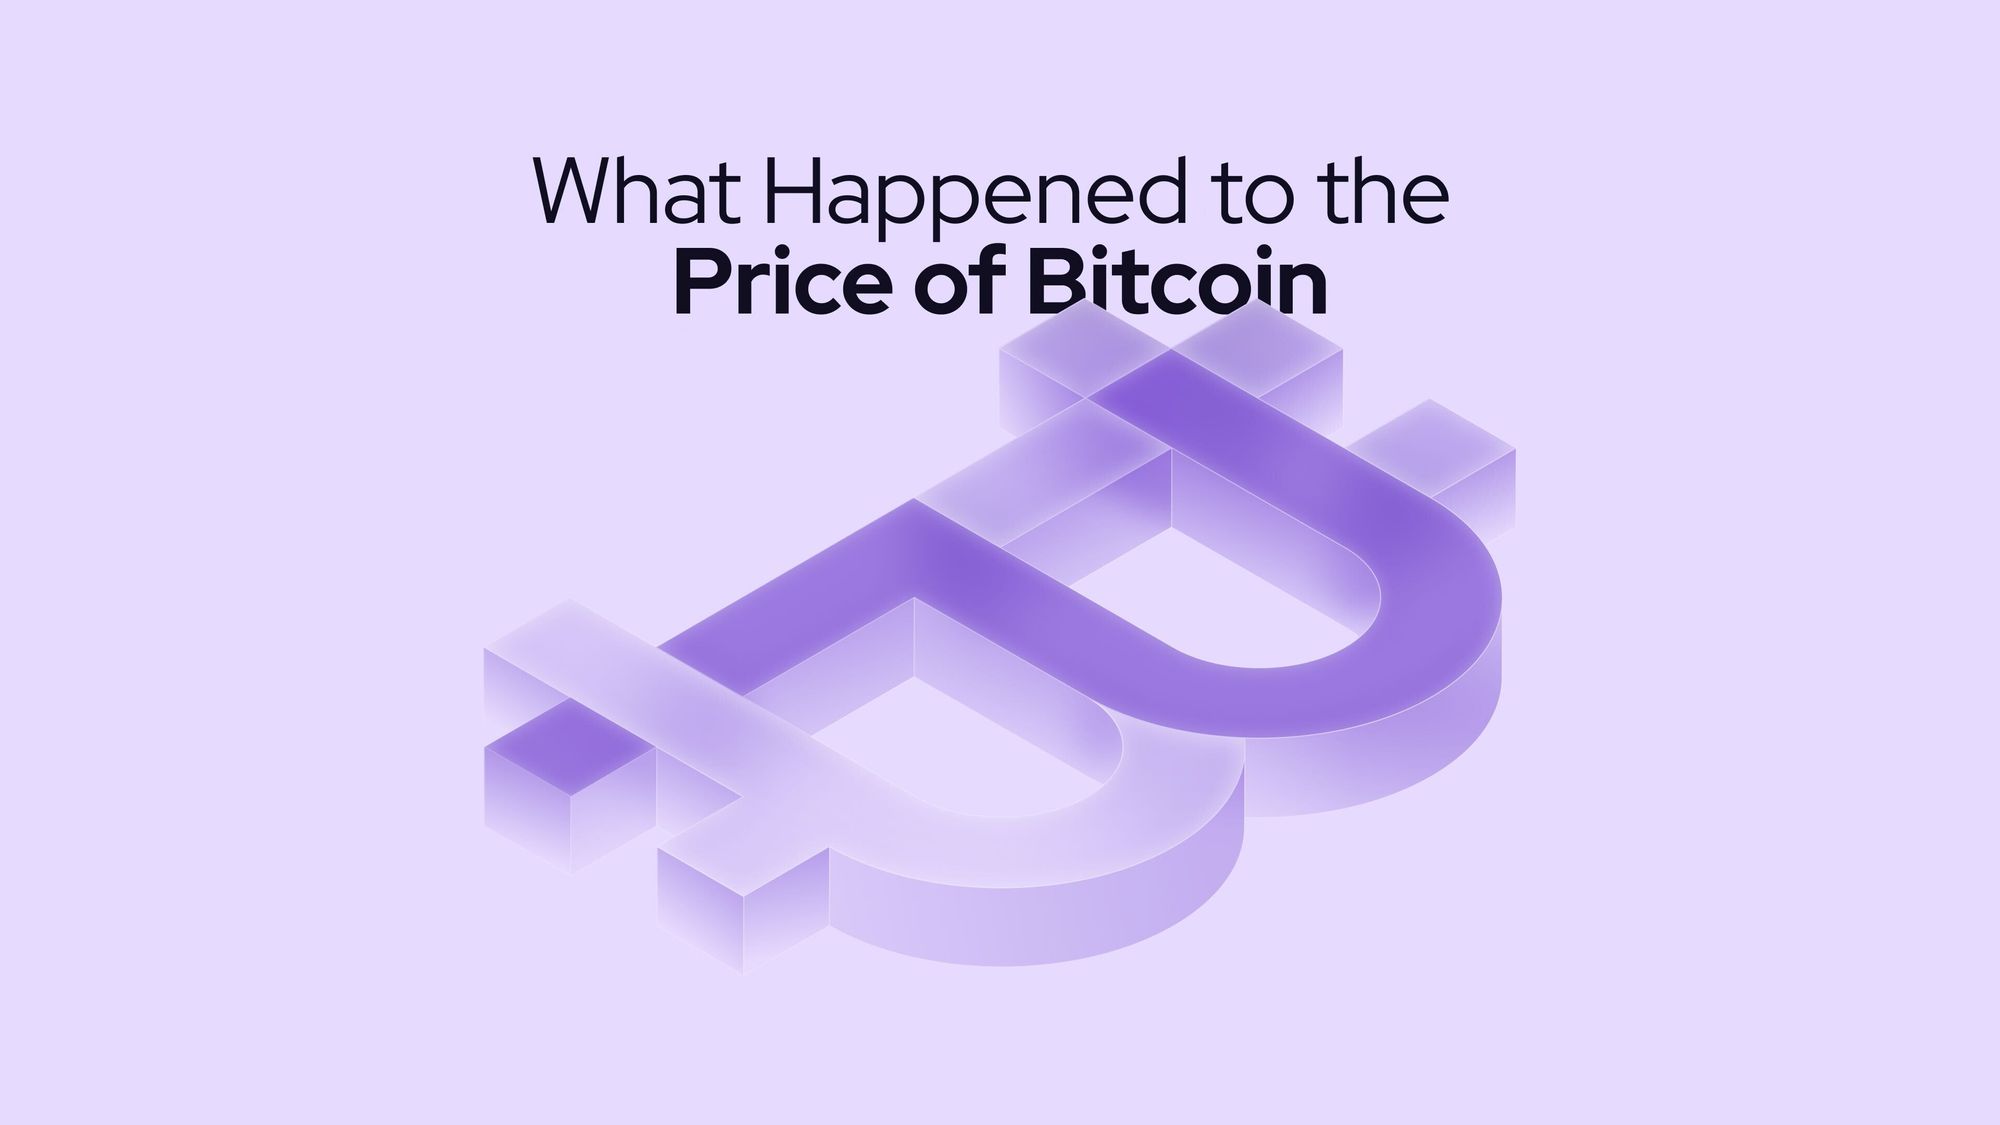 How Pyth Handled Bitcoin’s Price Fluctuations